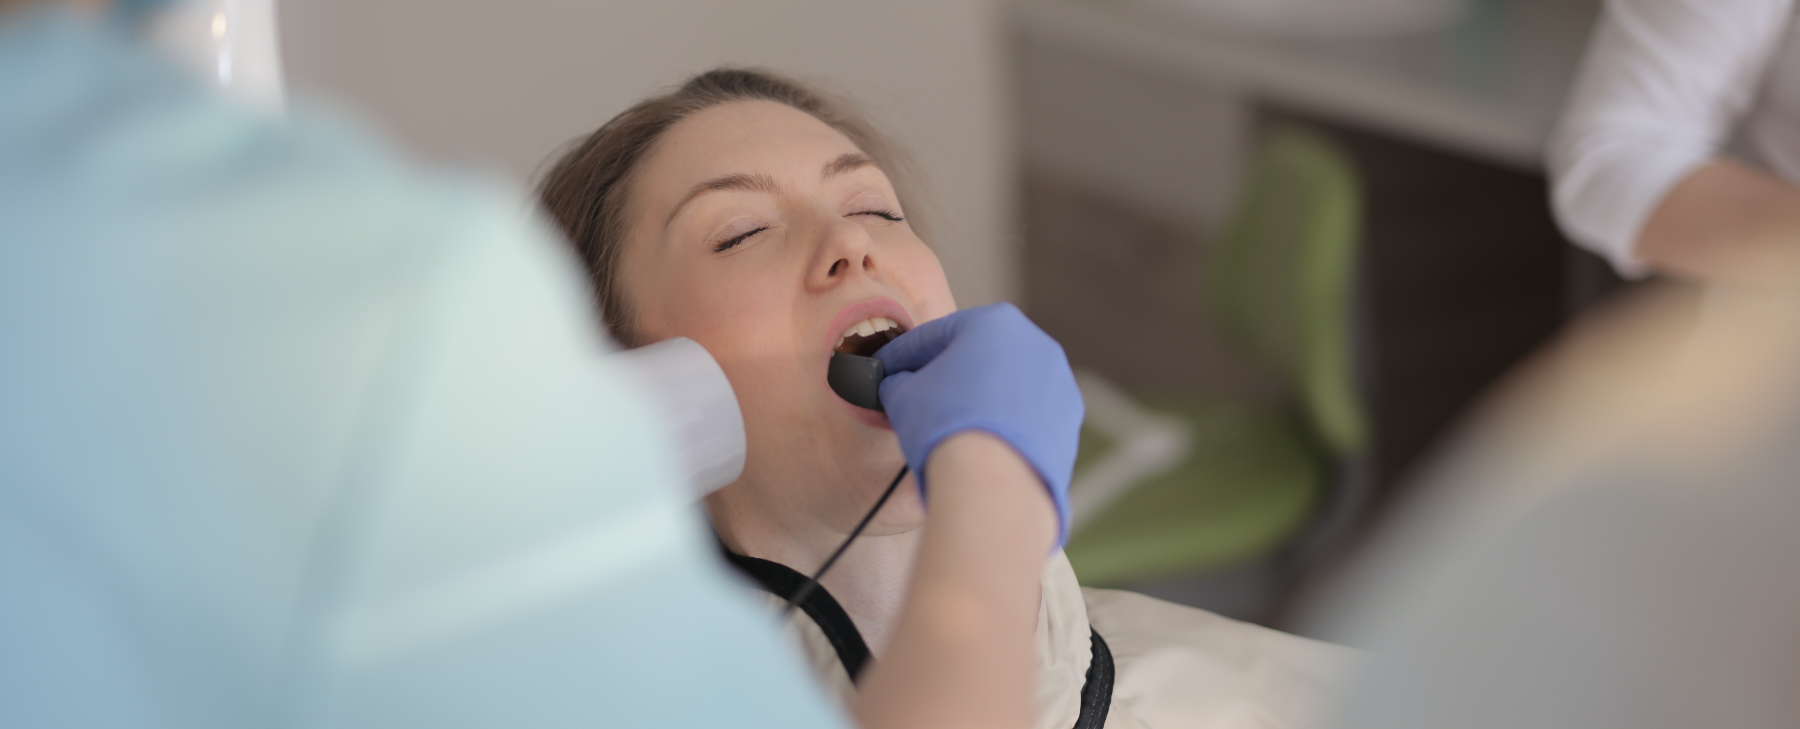 The Surprising Connections Between Oral Health and Mental Health